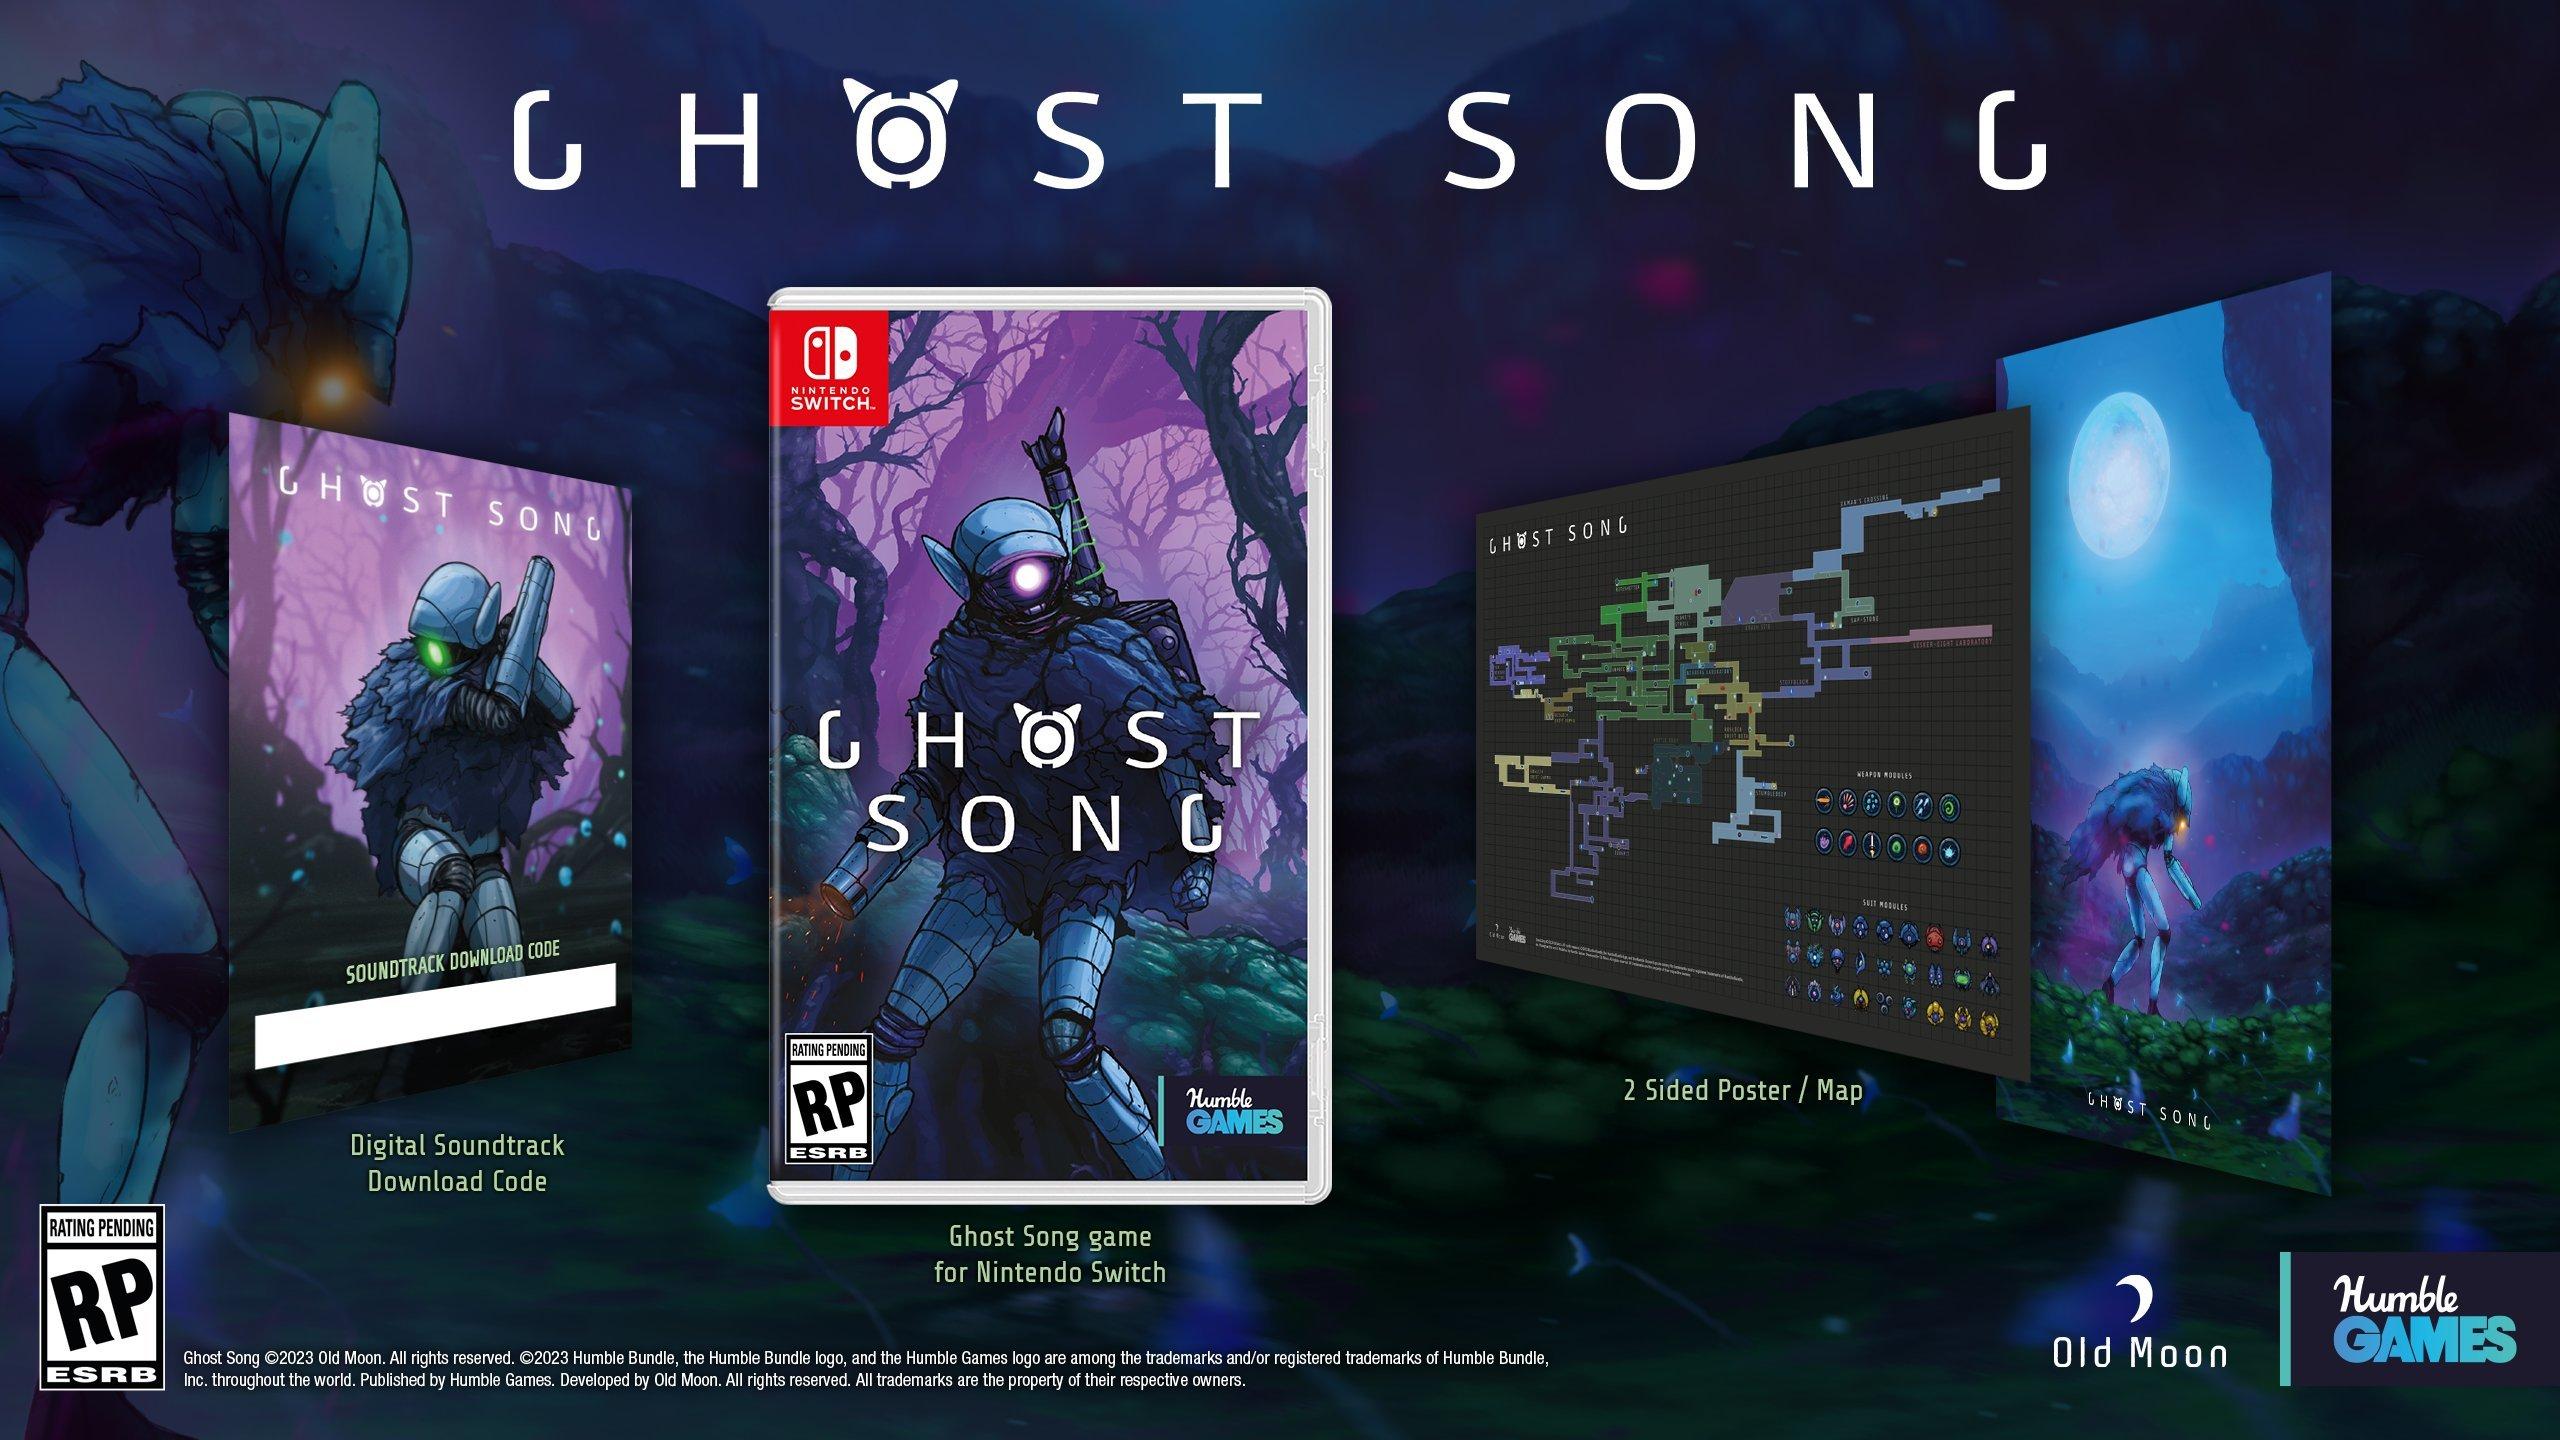 Ghost Song, Original Soundtrack Selections